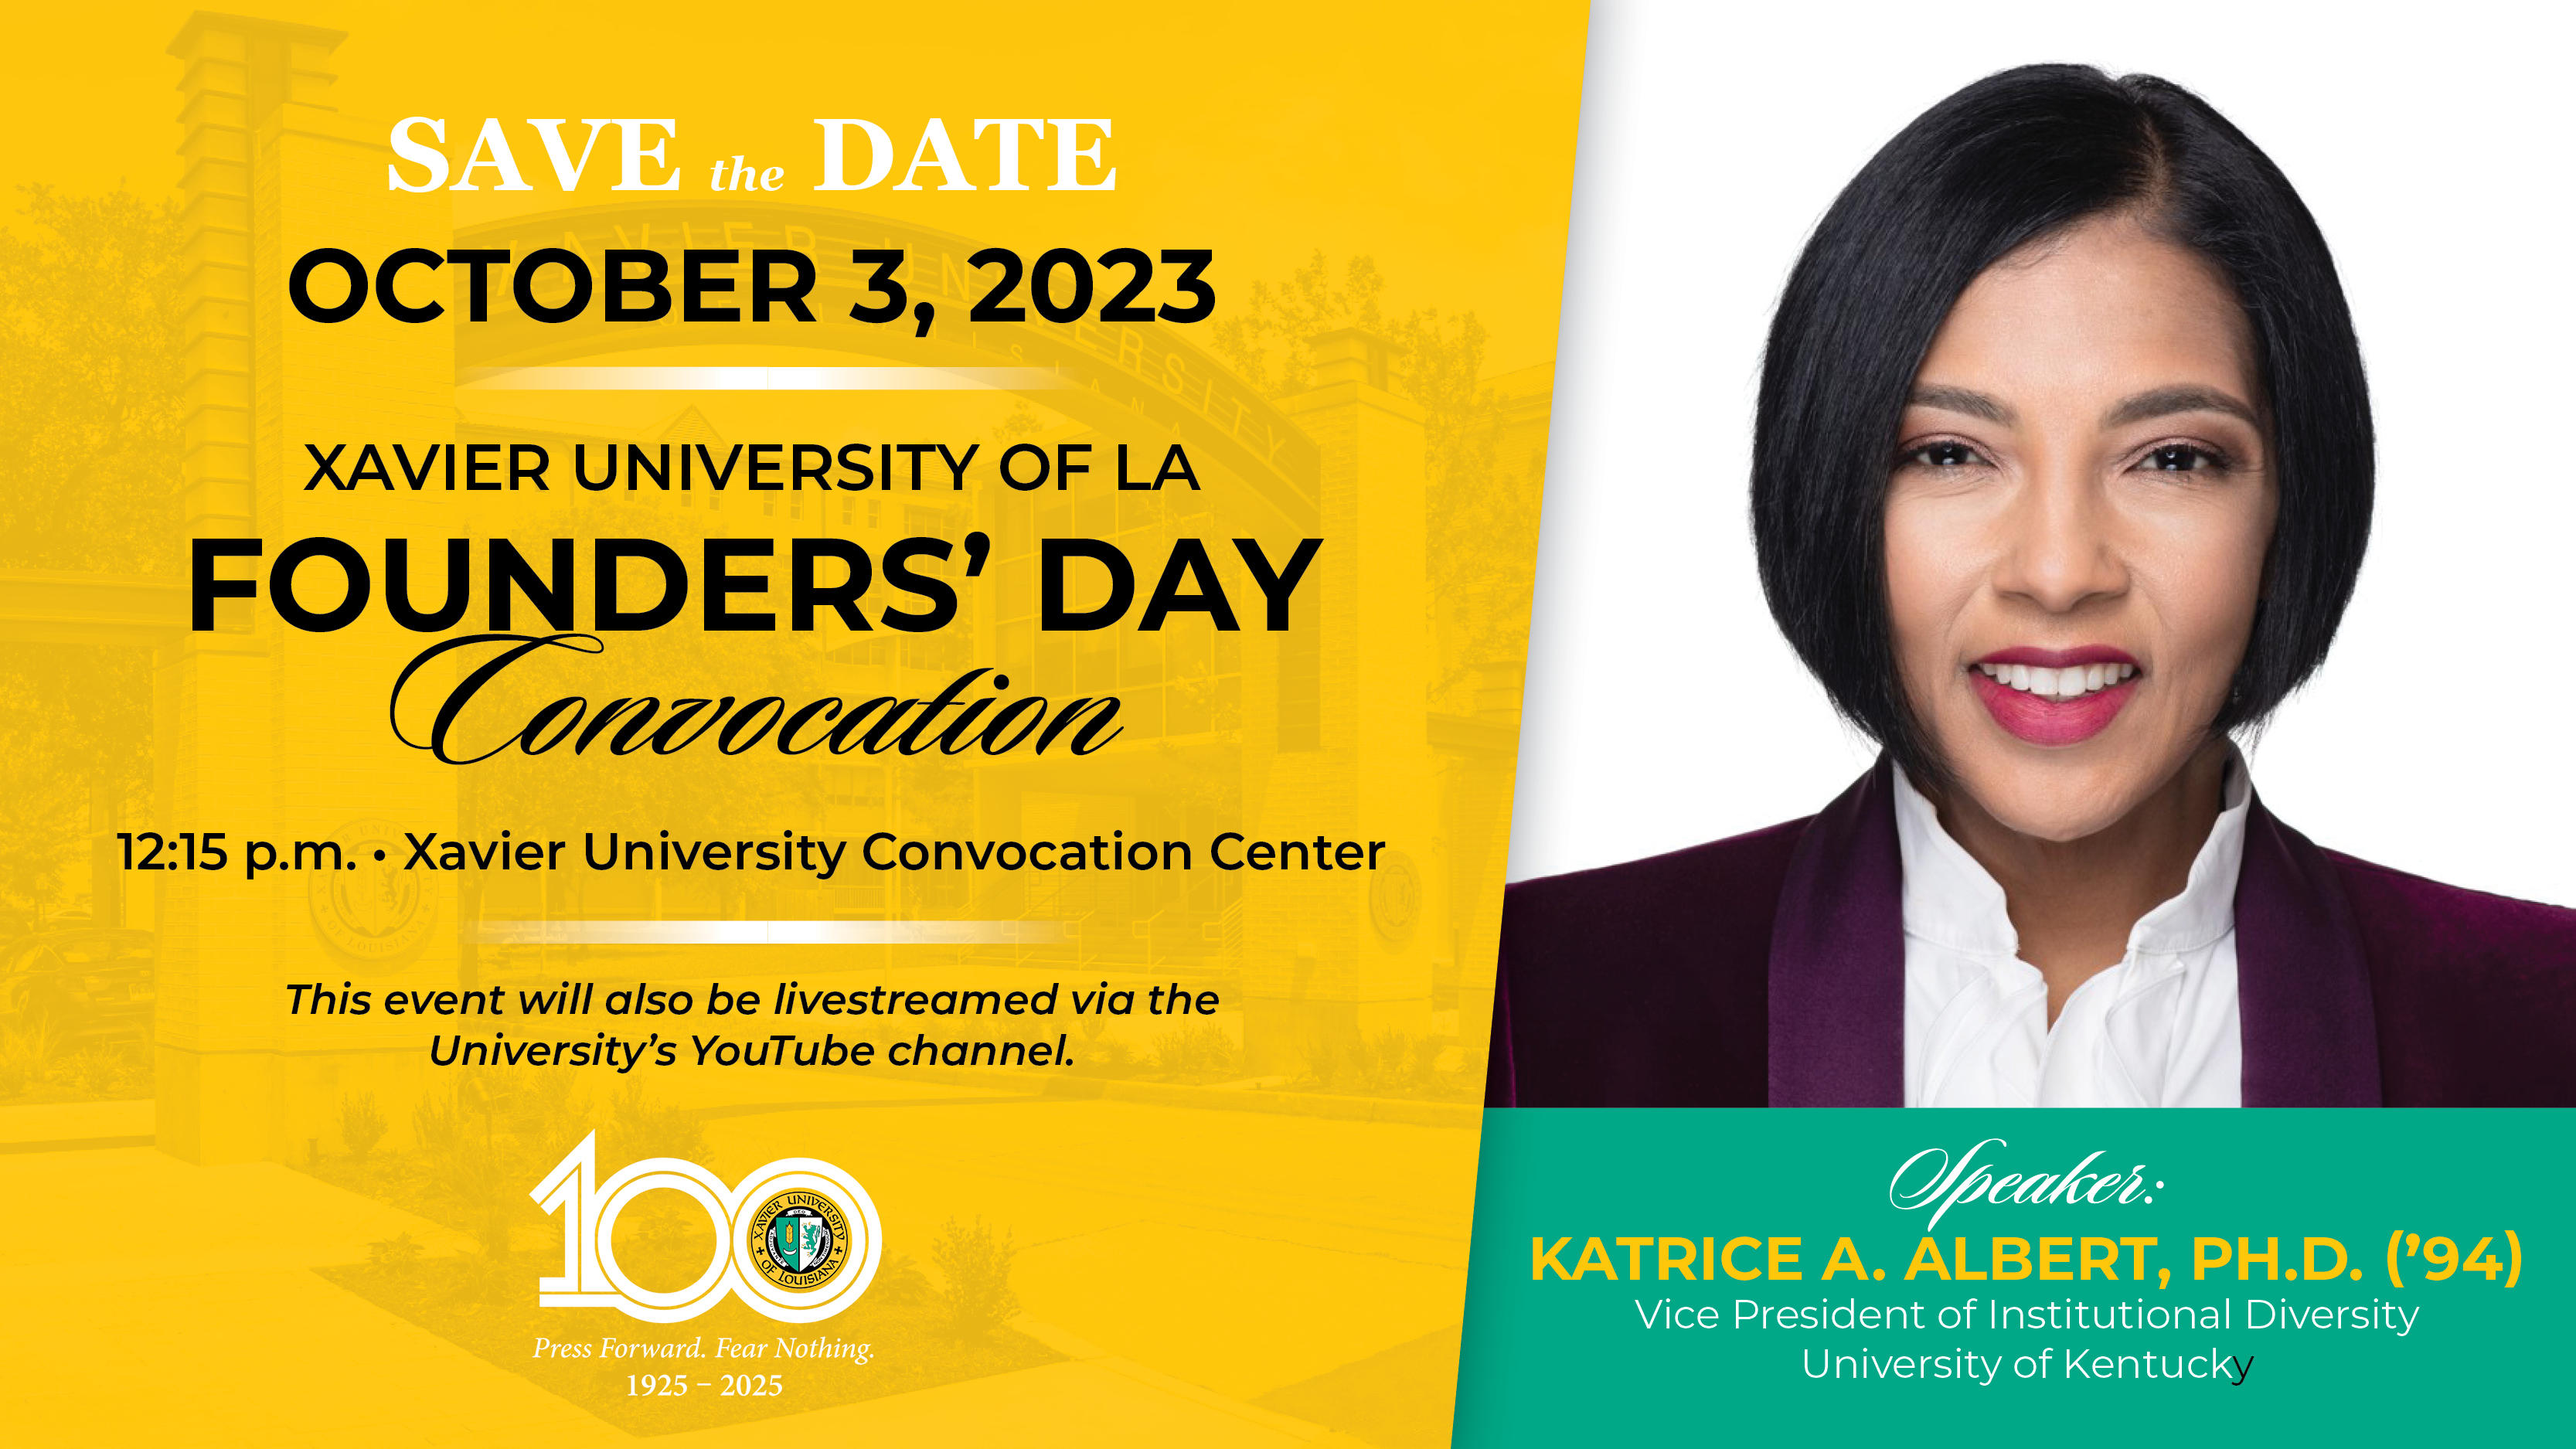 Katrice A. Albert, Ph.D., to speak at Xavier University of Louisiana Founders’ Day Convocation Ceremony